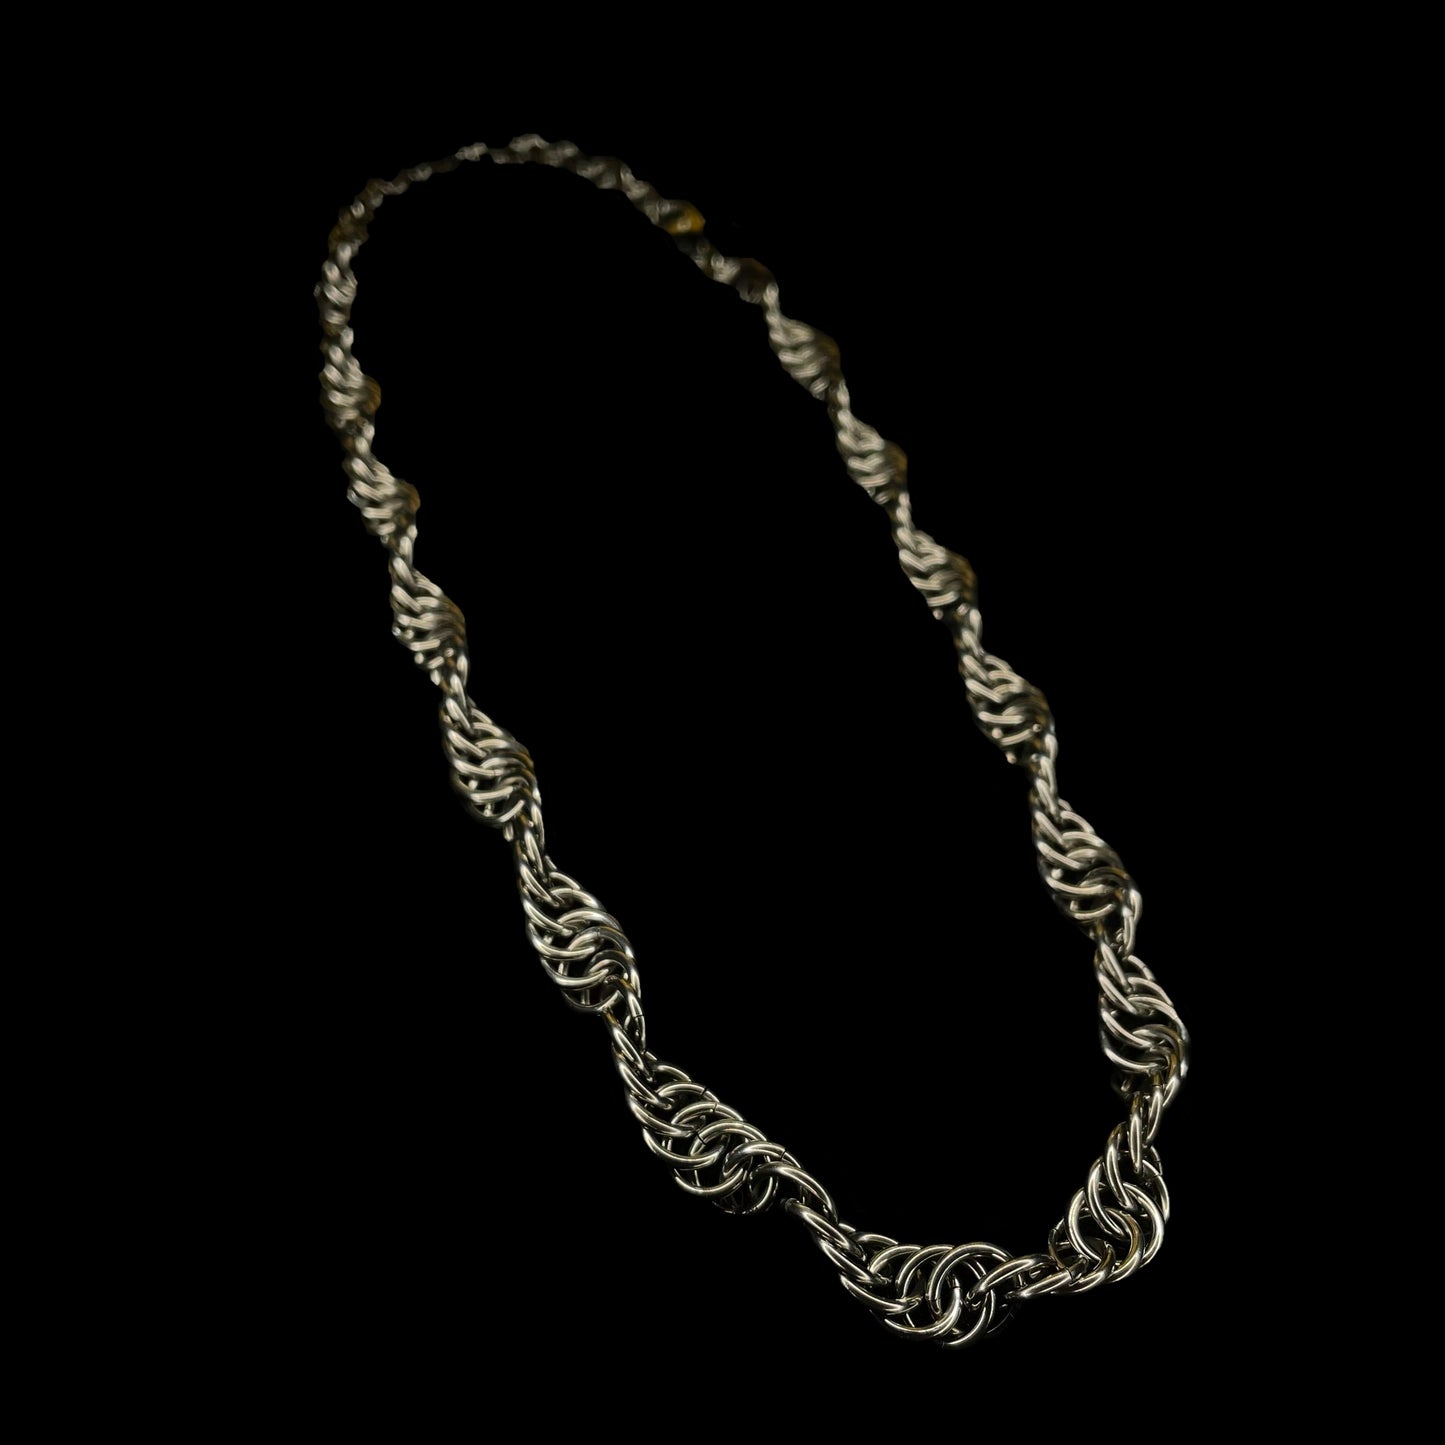 the simple spiral chain